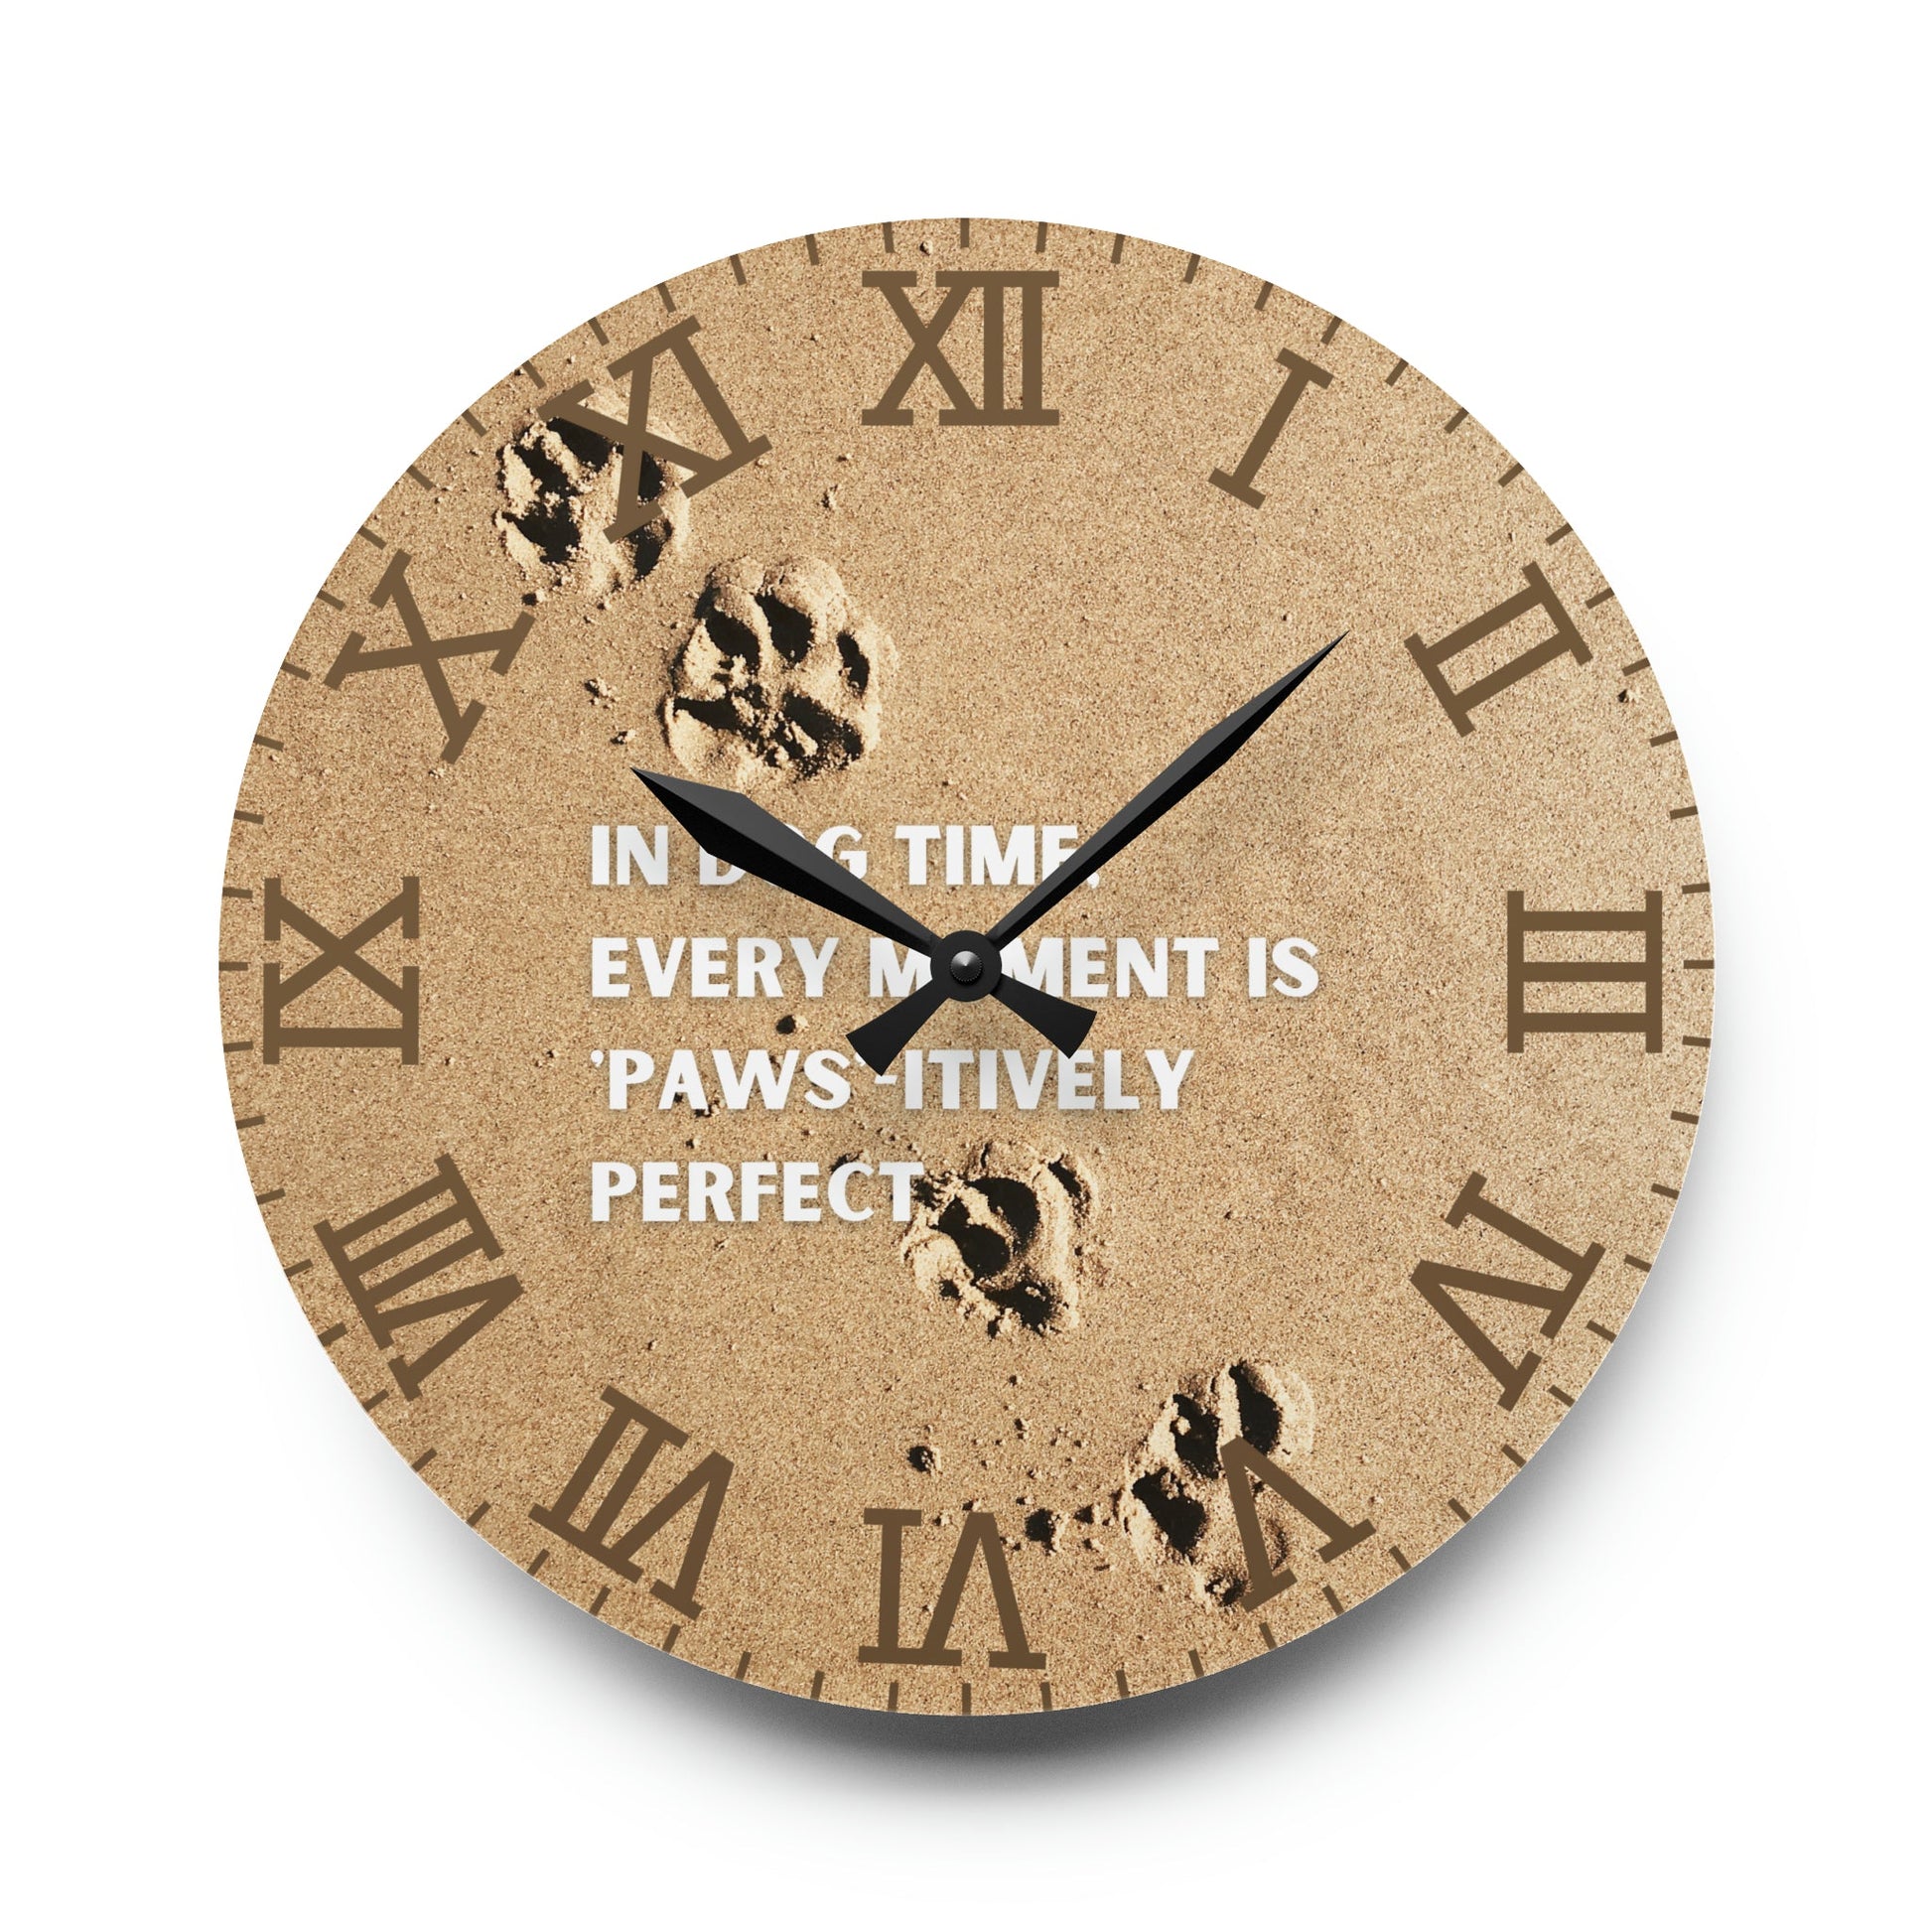 In Dog Time Wall Clock - 10.75’’ × (Round) Home Decor